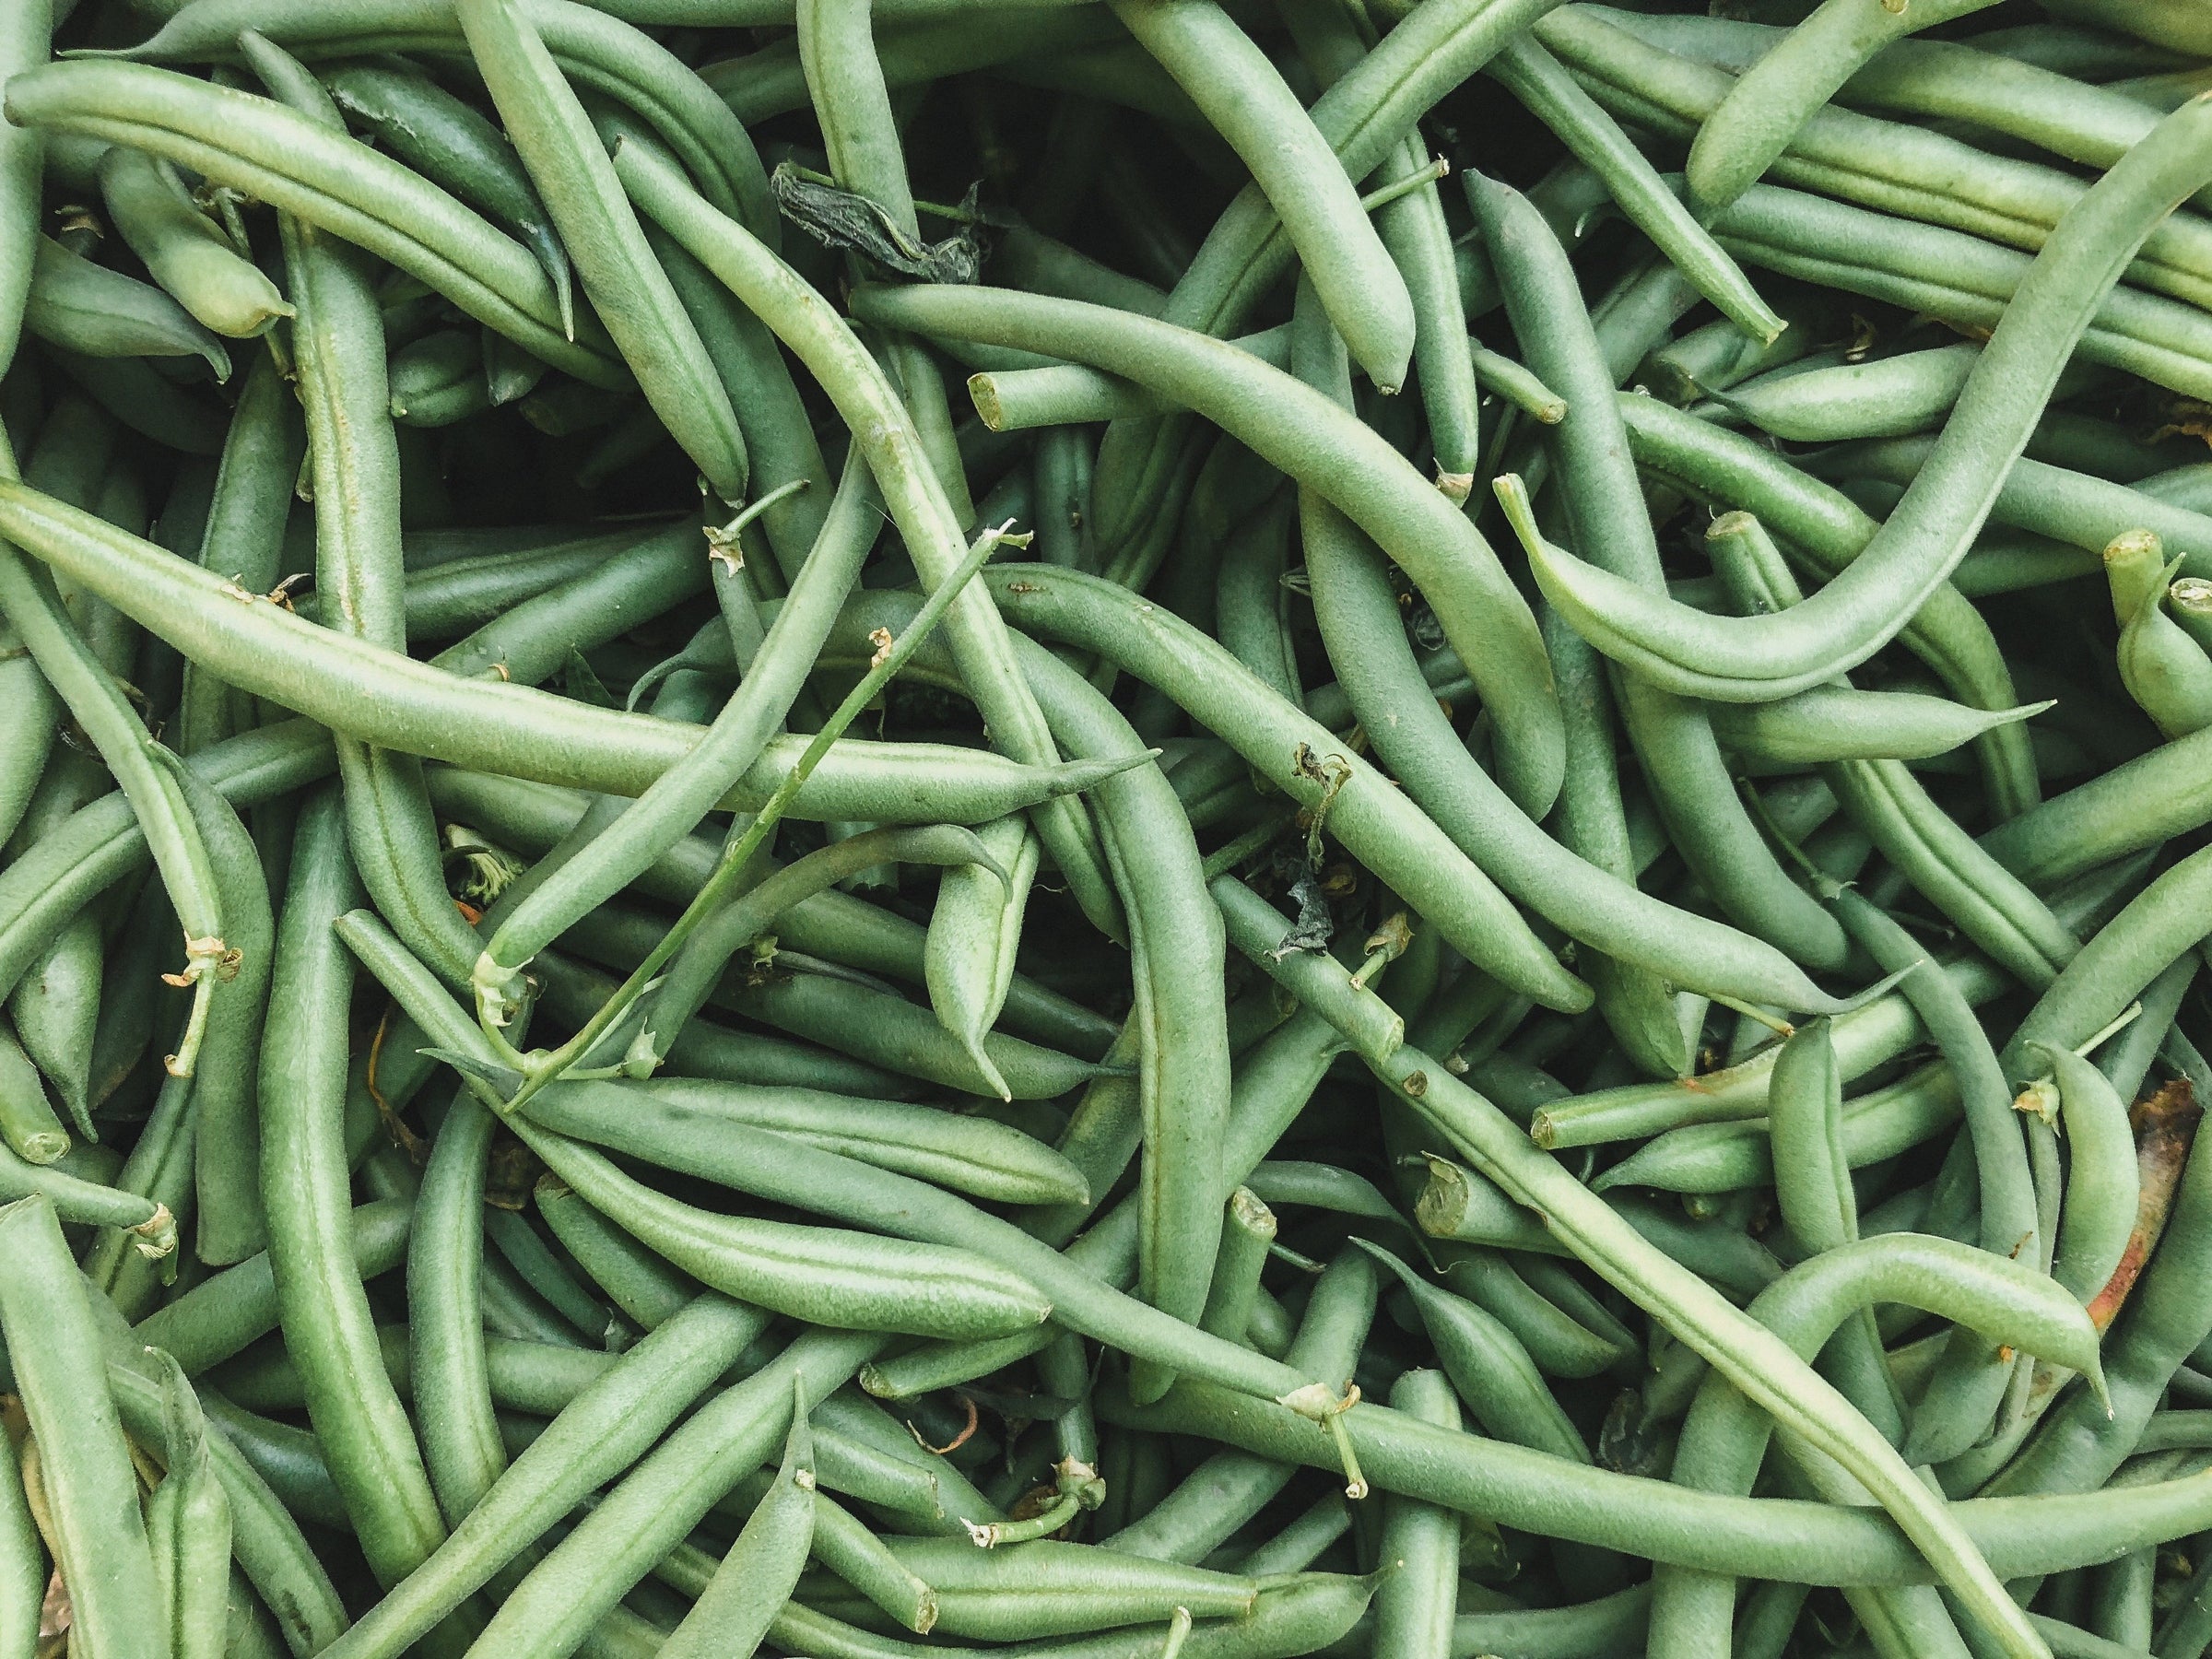 grow fresh green beans to dry or cook